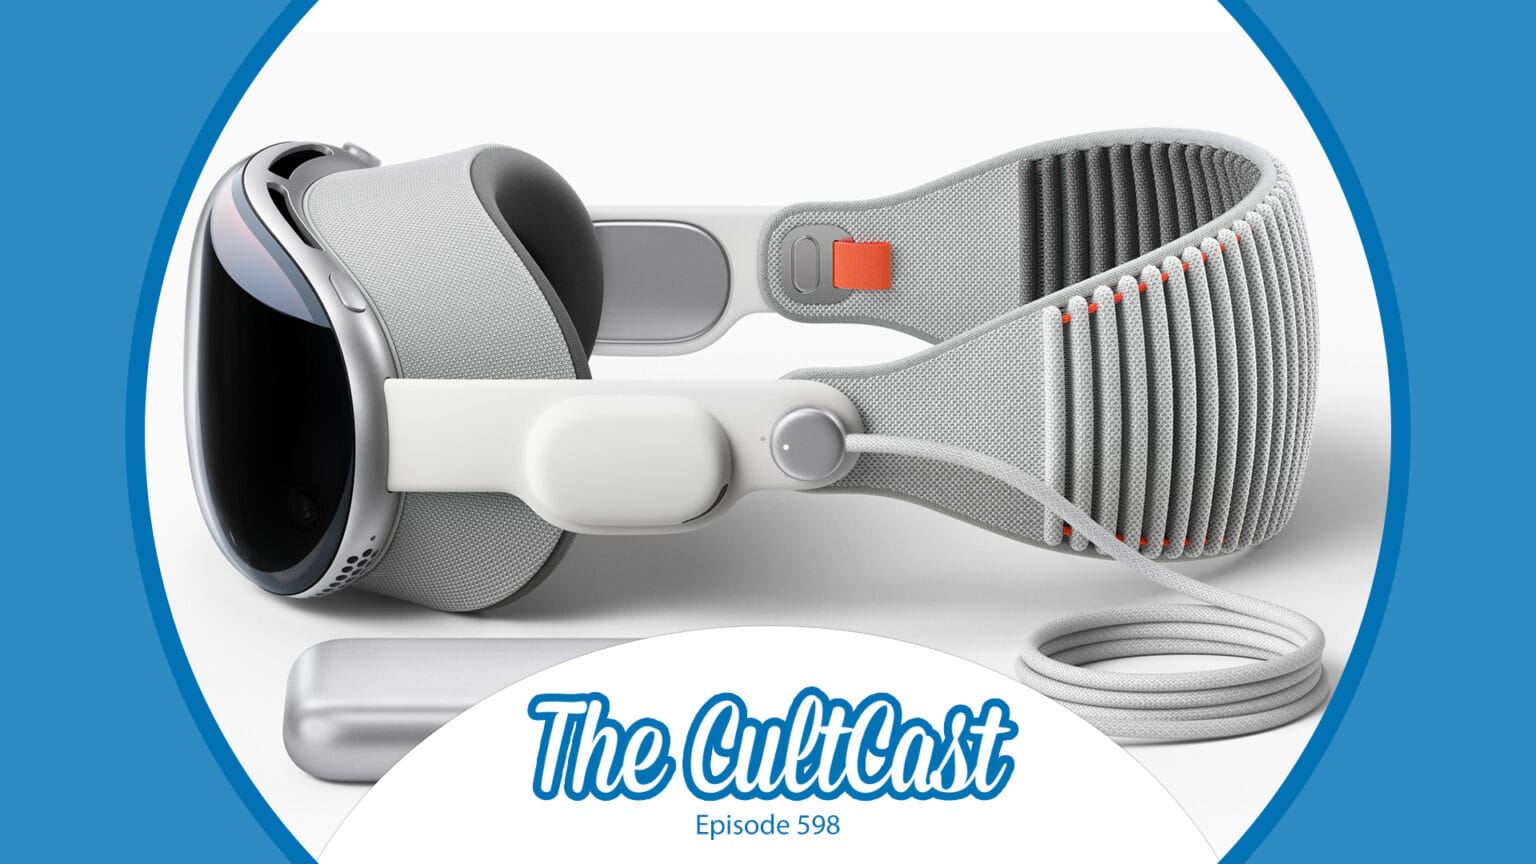 Apple Vision Pro on The CultCast podcast: The technology sound amazing!